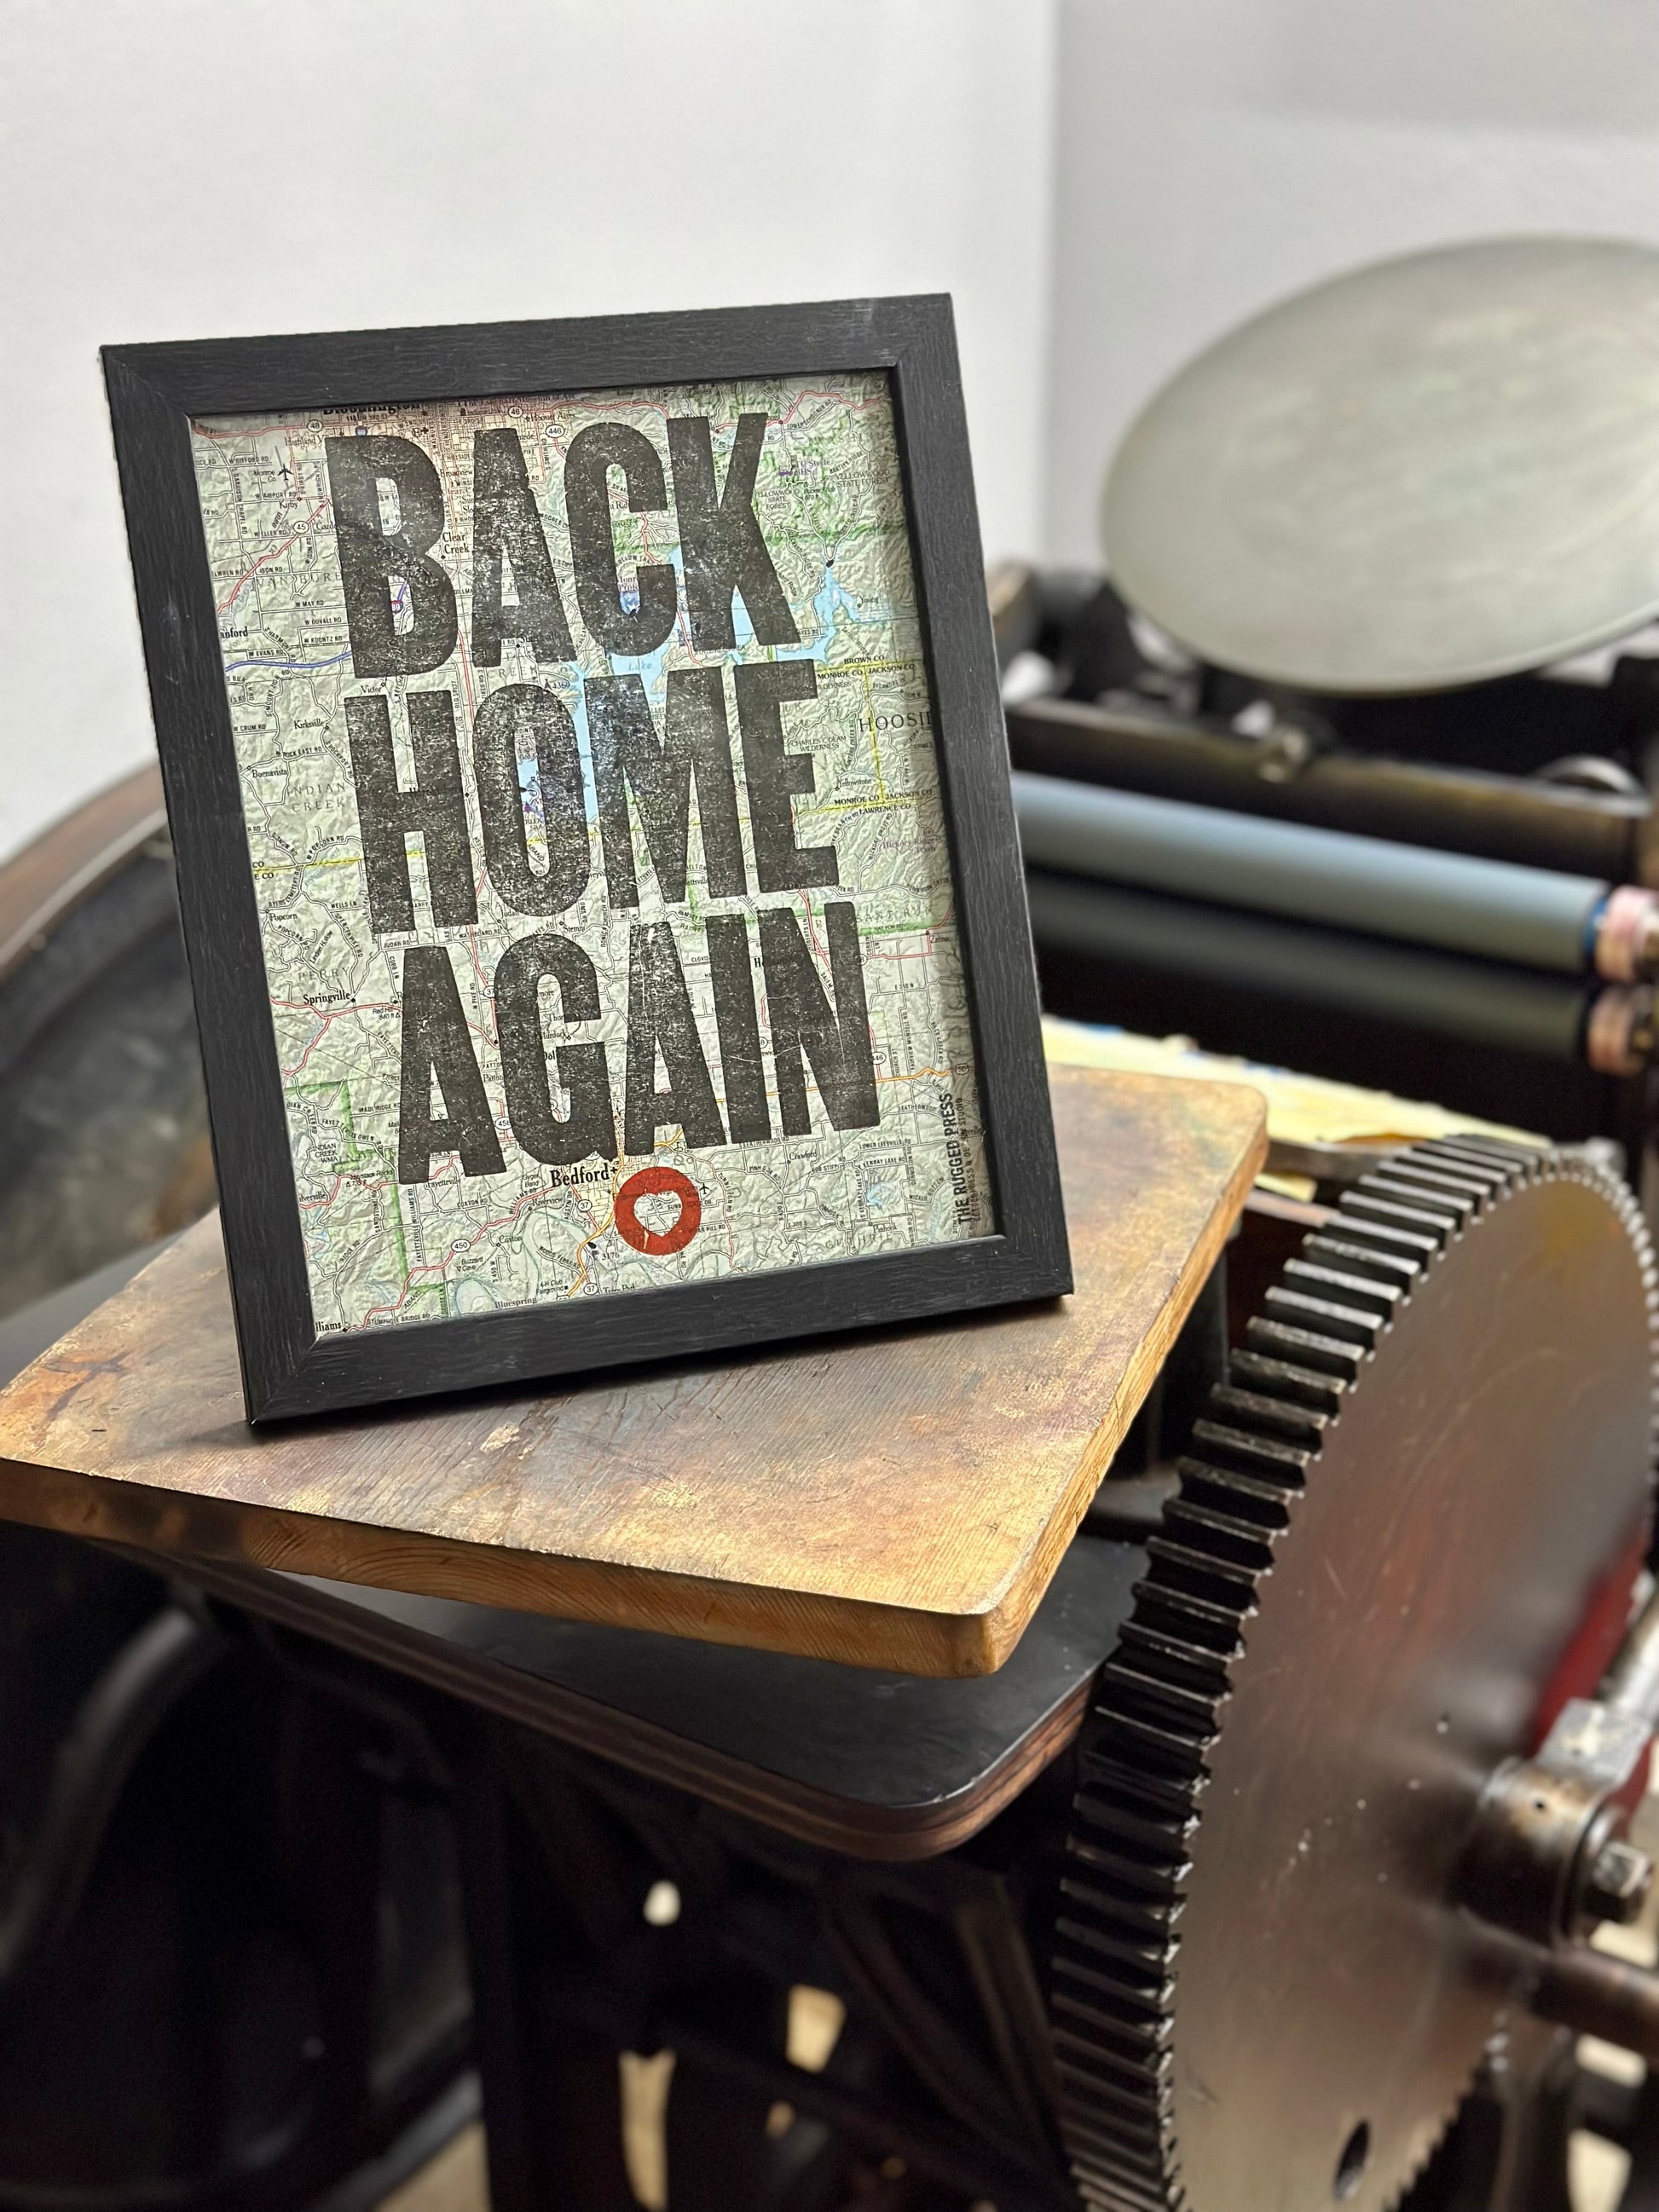 Back Home Again - 8x10 Letterpress print on road map with The Rugged Press in background